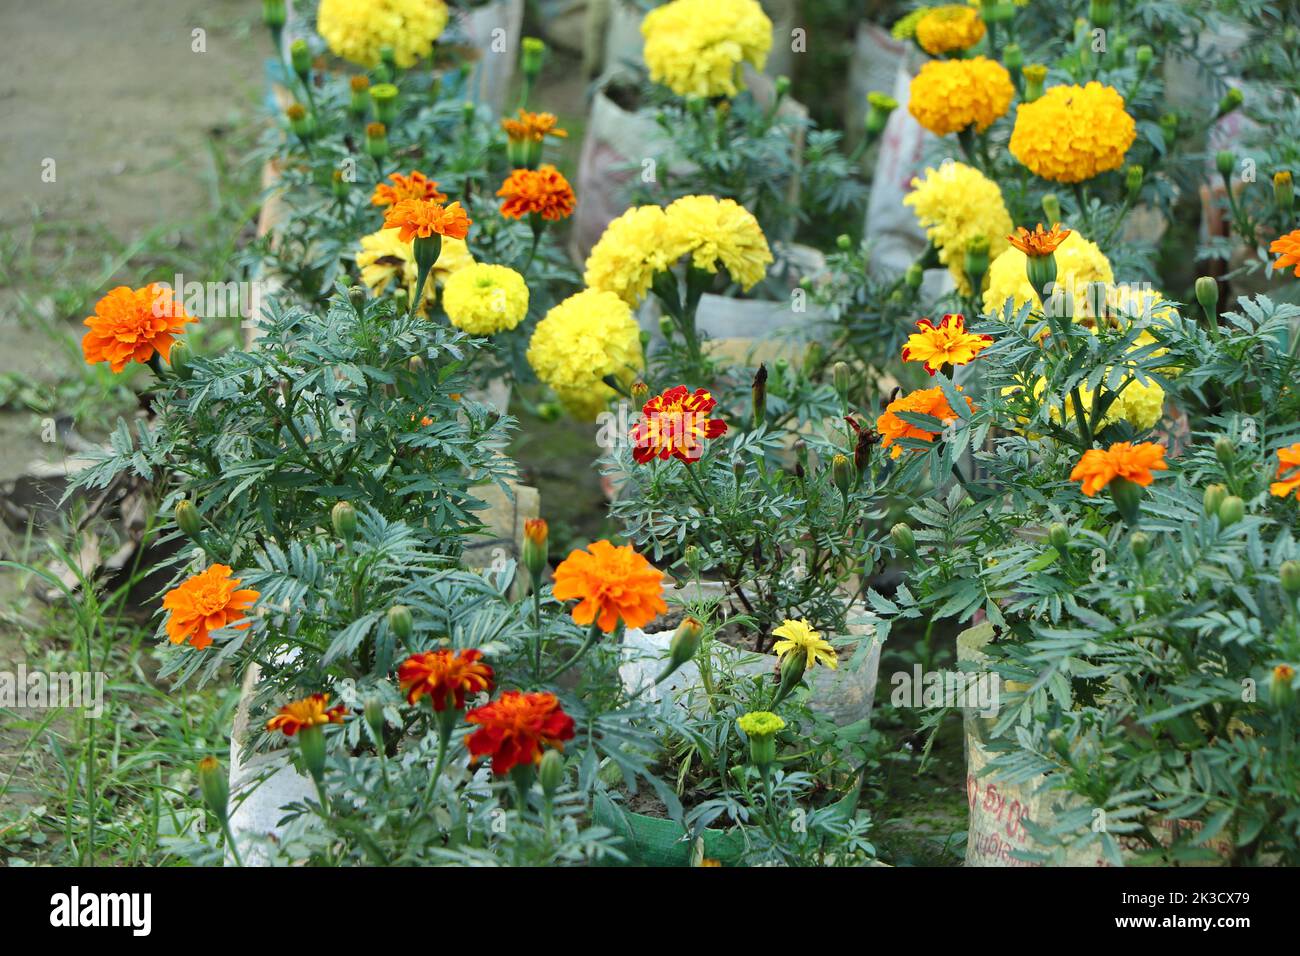 Yellow and red marigold flowers are growing on plastic bag in garden Stock Photo